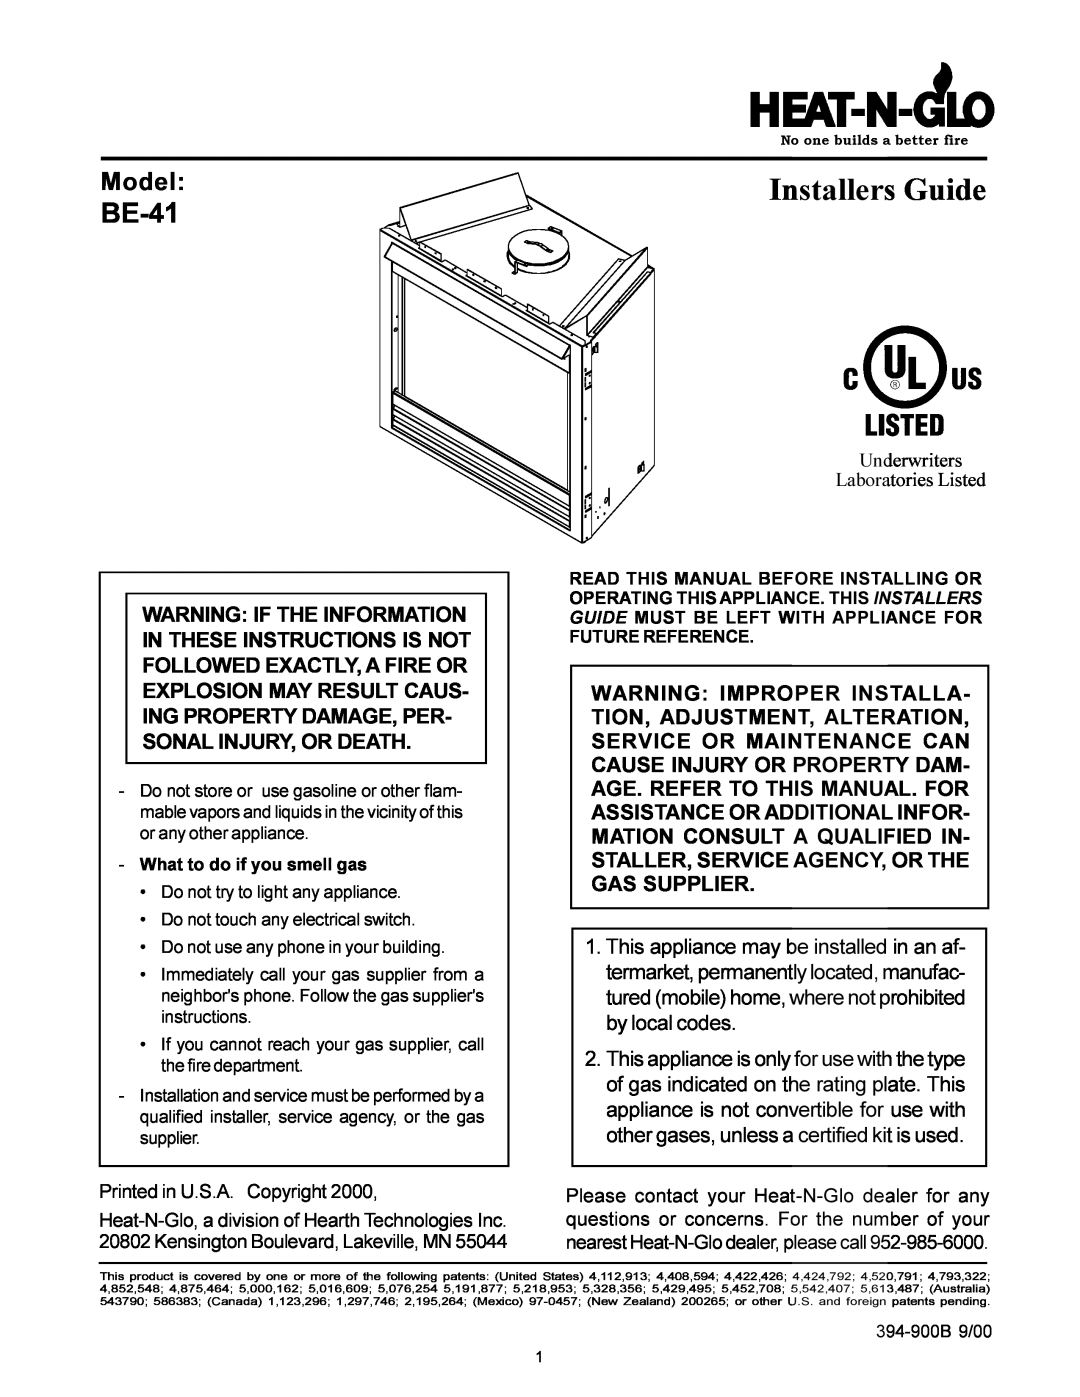 Heat & Glo LifeStyle BE-41 manual Model, Installers Guide 